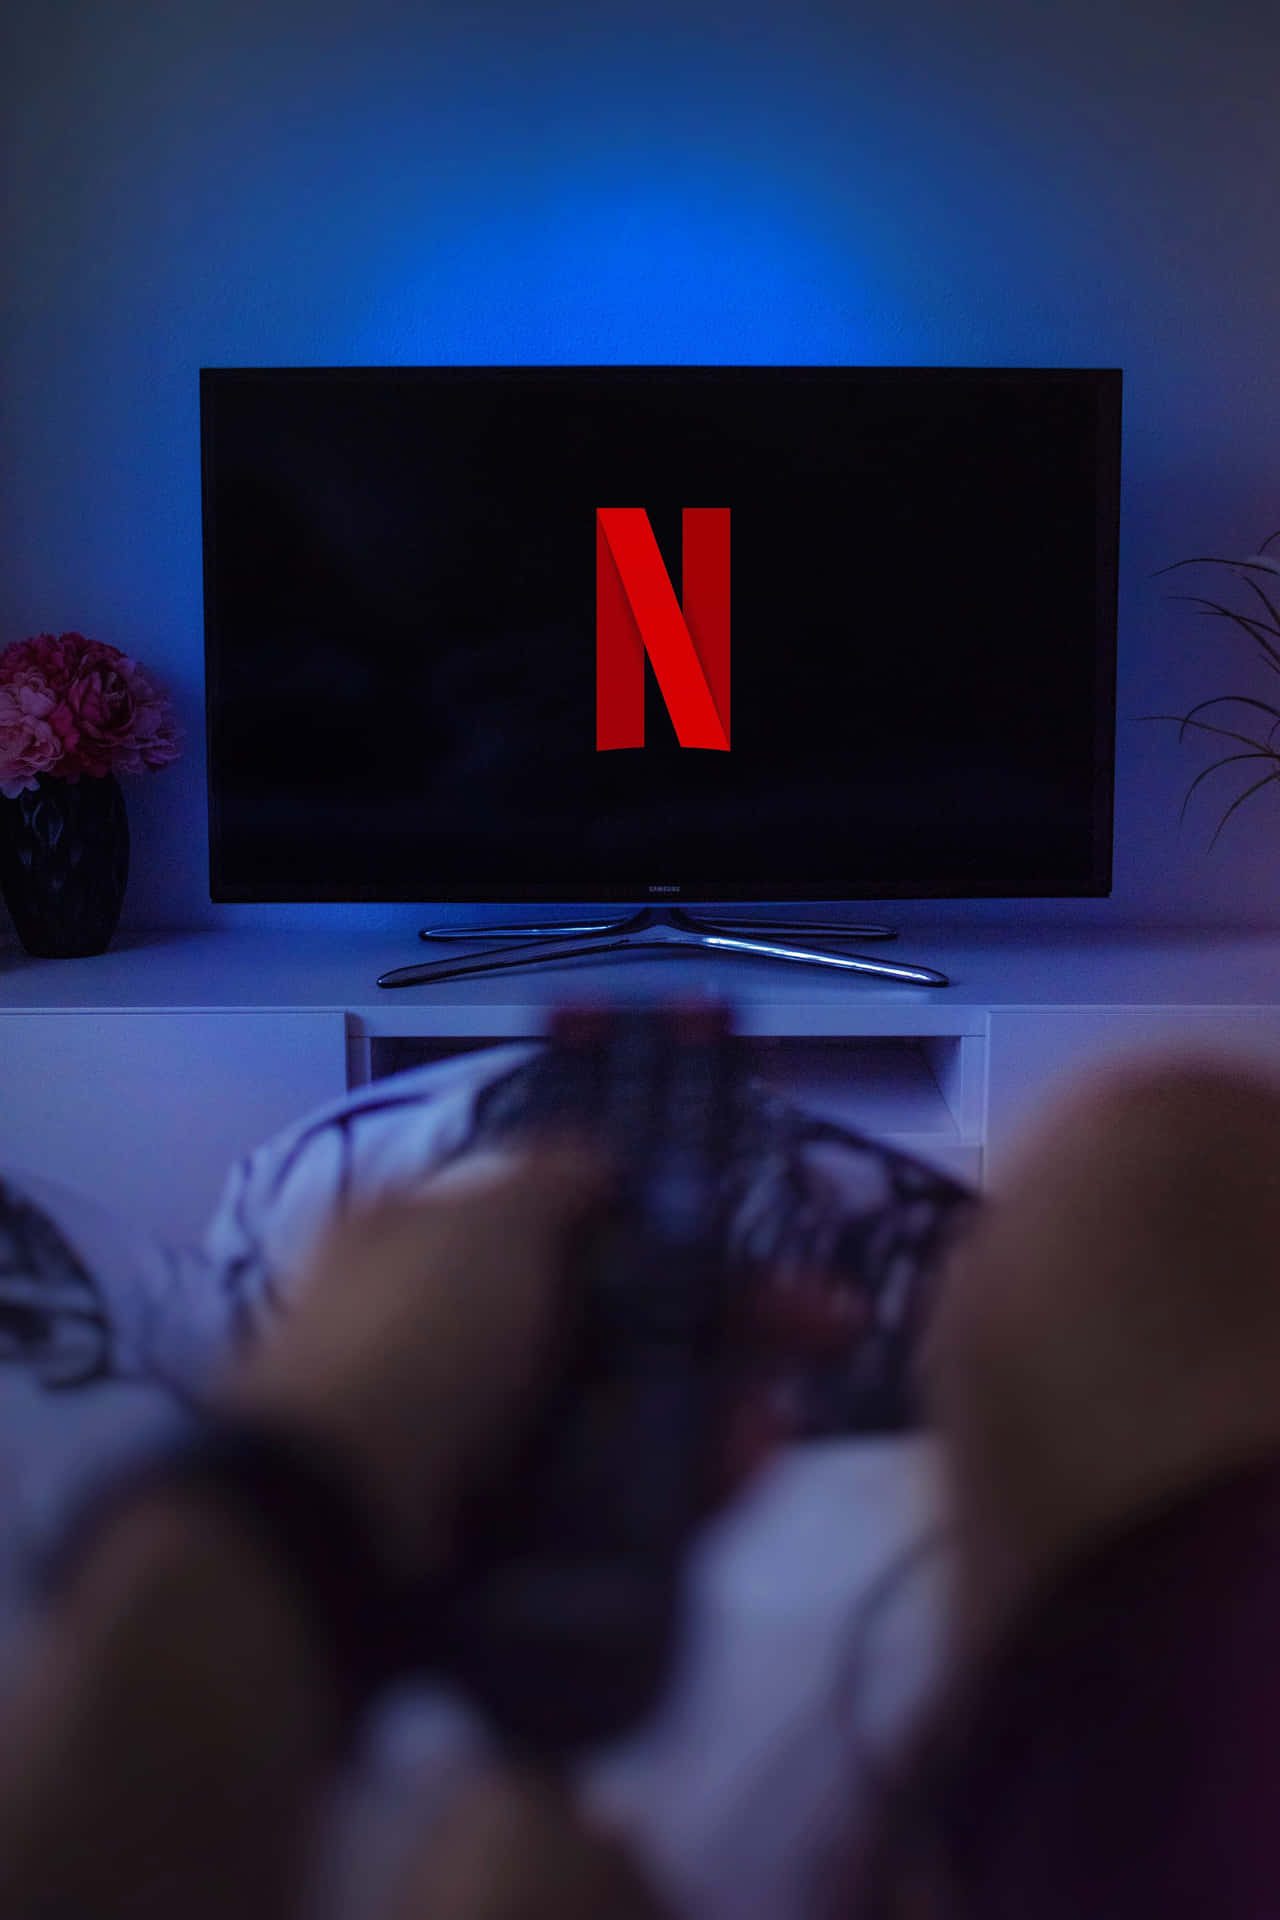 Binge on your favorite series anytime with Netflix